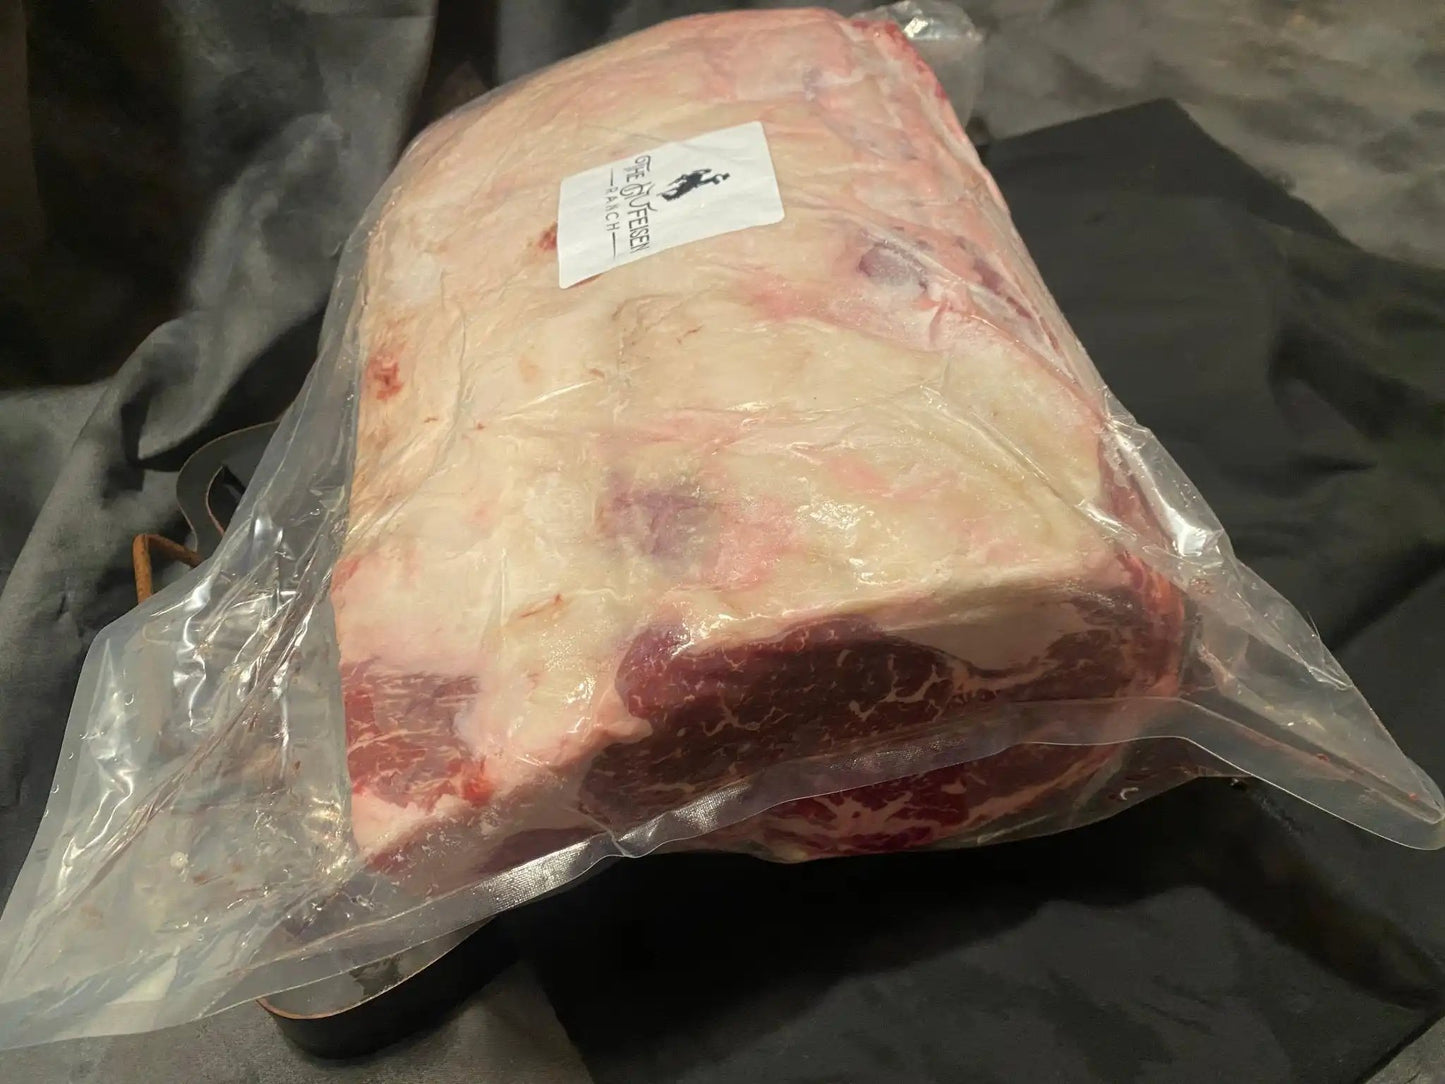 100% All-Natural Grass-Fed Pasture-Raised Wagyu Bone-in Prime Rib Roas





Introducing the 100% All-Natural Grass-Fed Pasture-Raised Wagyu Bone-in Prime Rib Roast from Hufeisen Ranch, the pinnacle of Wagyu beef excellence. This premie100%The Hufeisen-Ranch (WYO Wagyu)